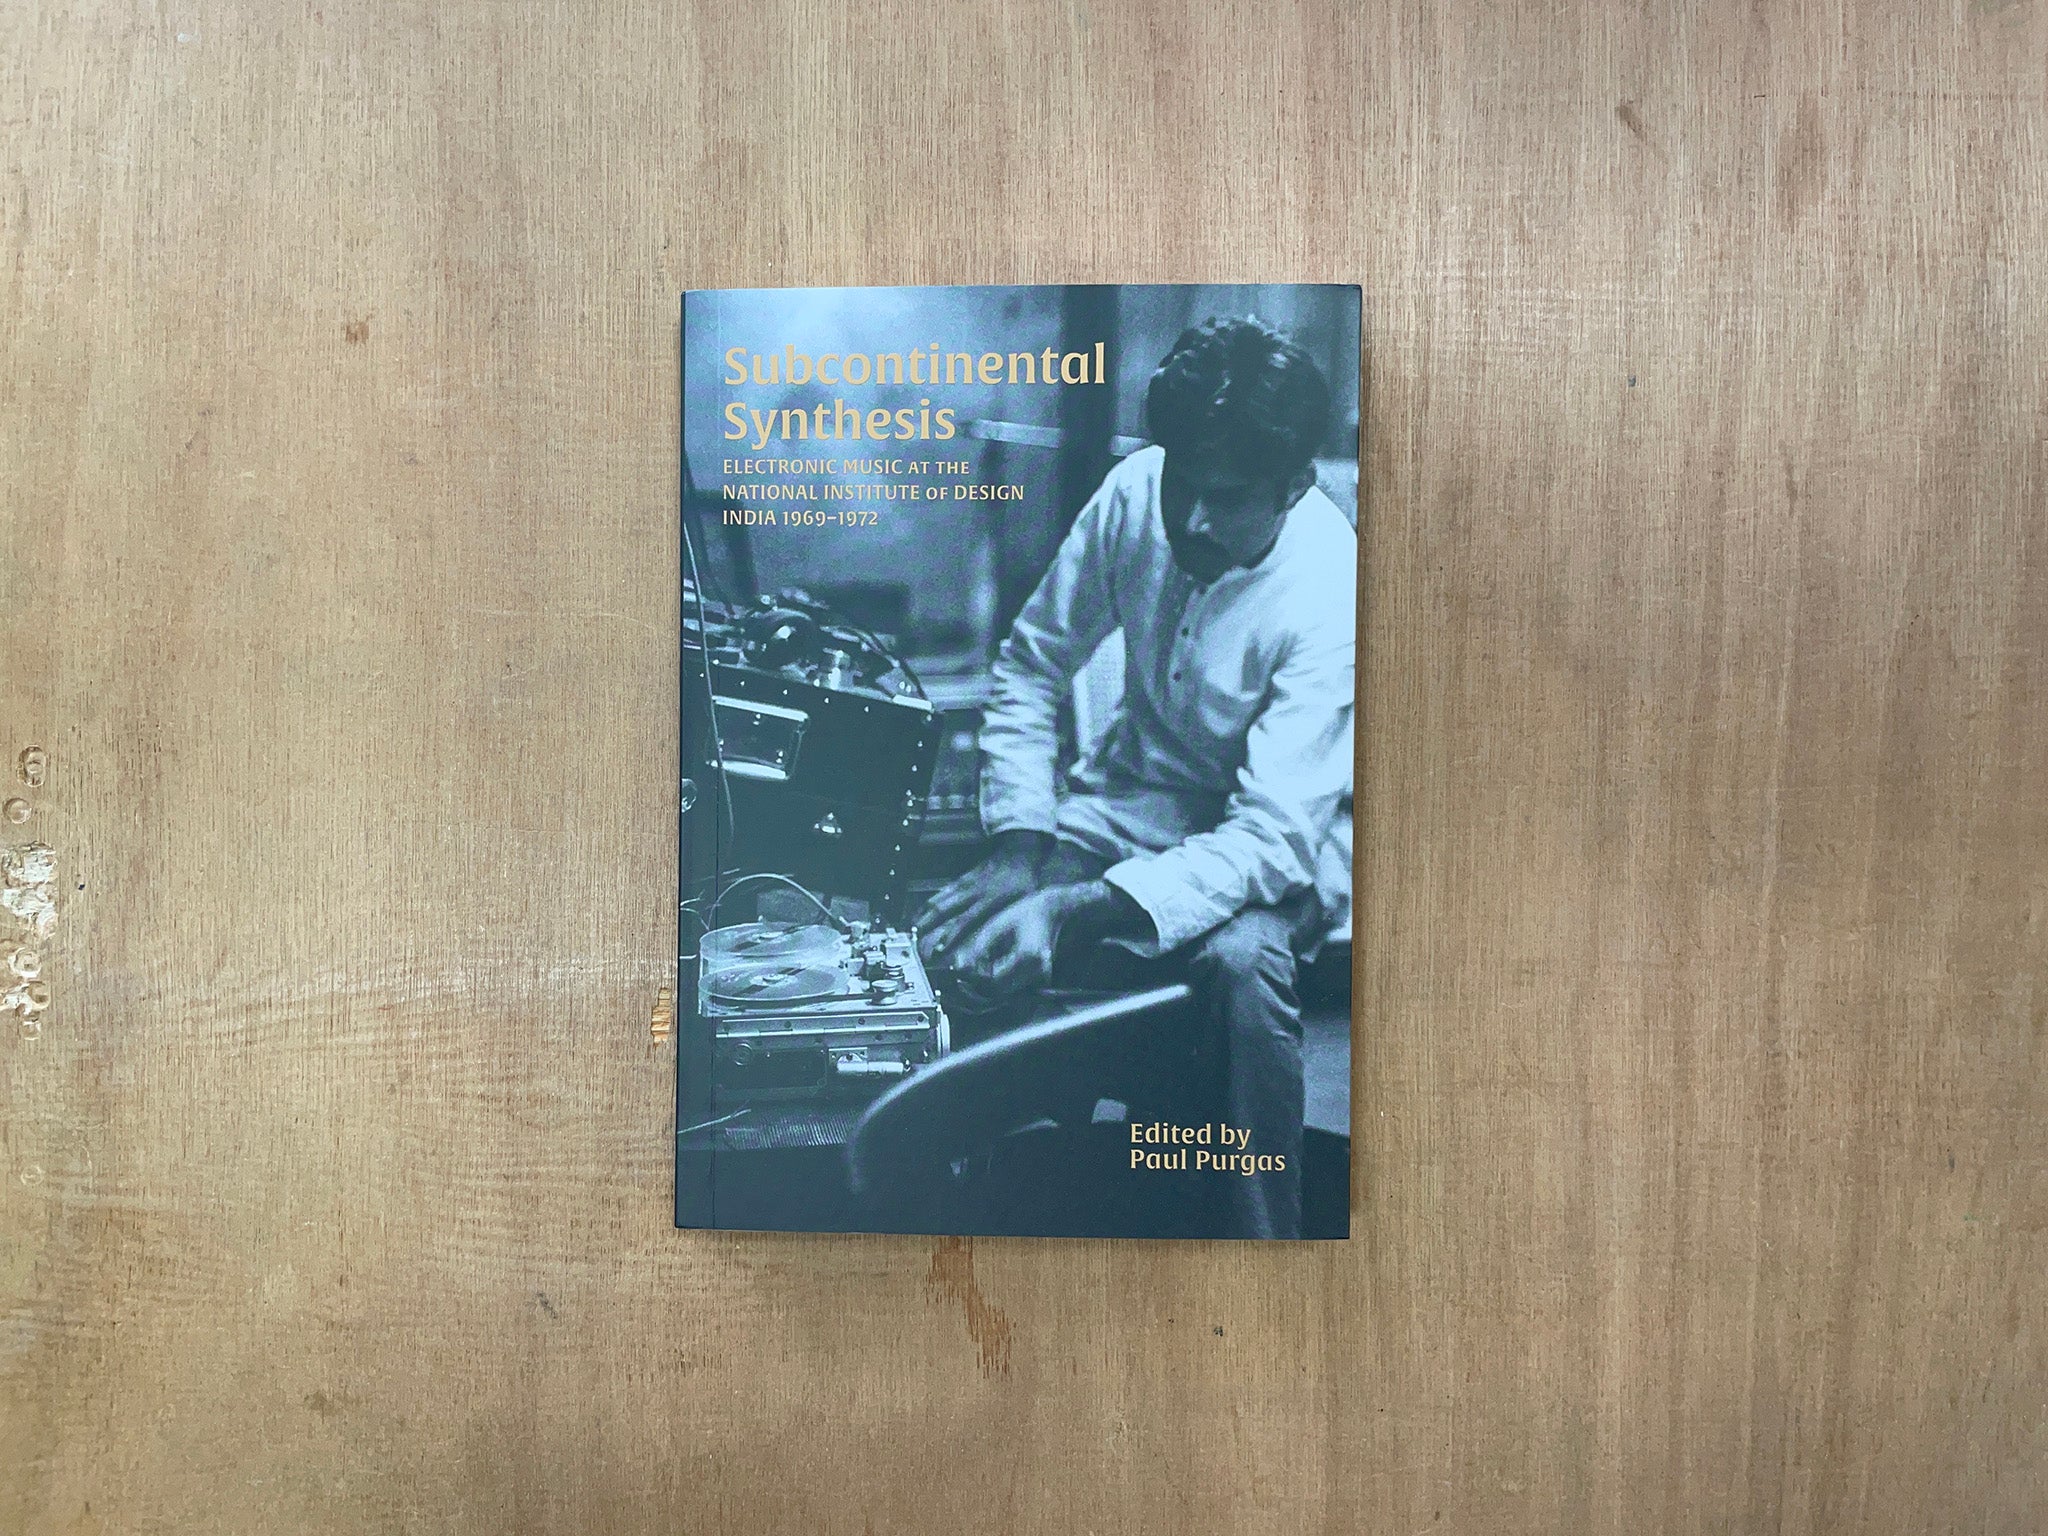 SUBCONTINENTAL SYNTHESIS: ELECTRONIC MUSIC AT THE NATIONAL INSTITUTE OF DESIGN, INDIA 1969–1972 Ed. by Paul Purgas